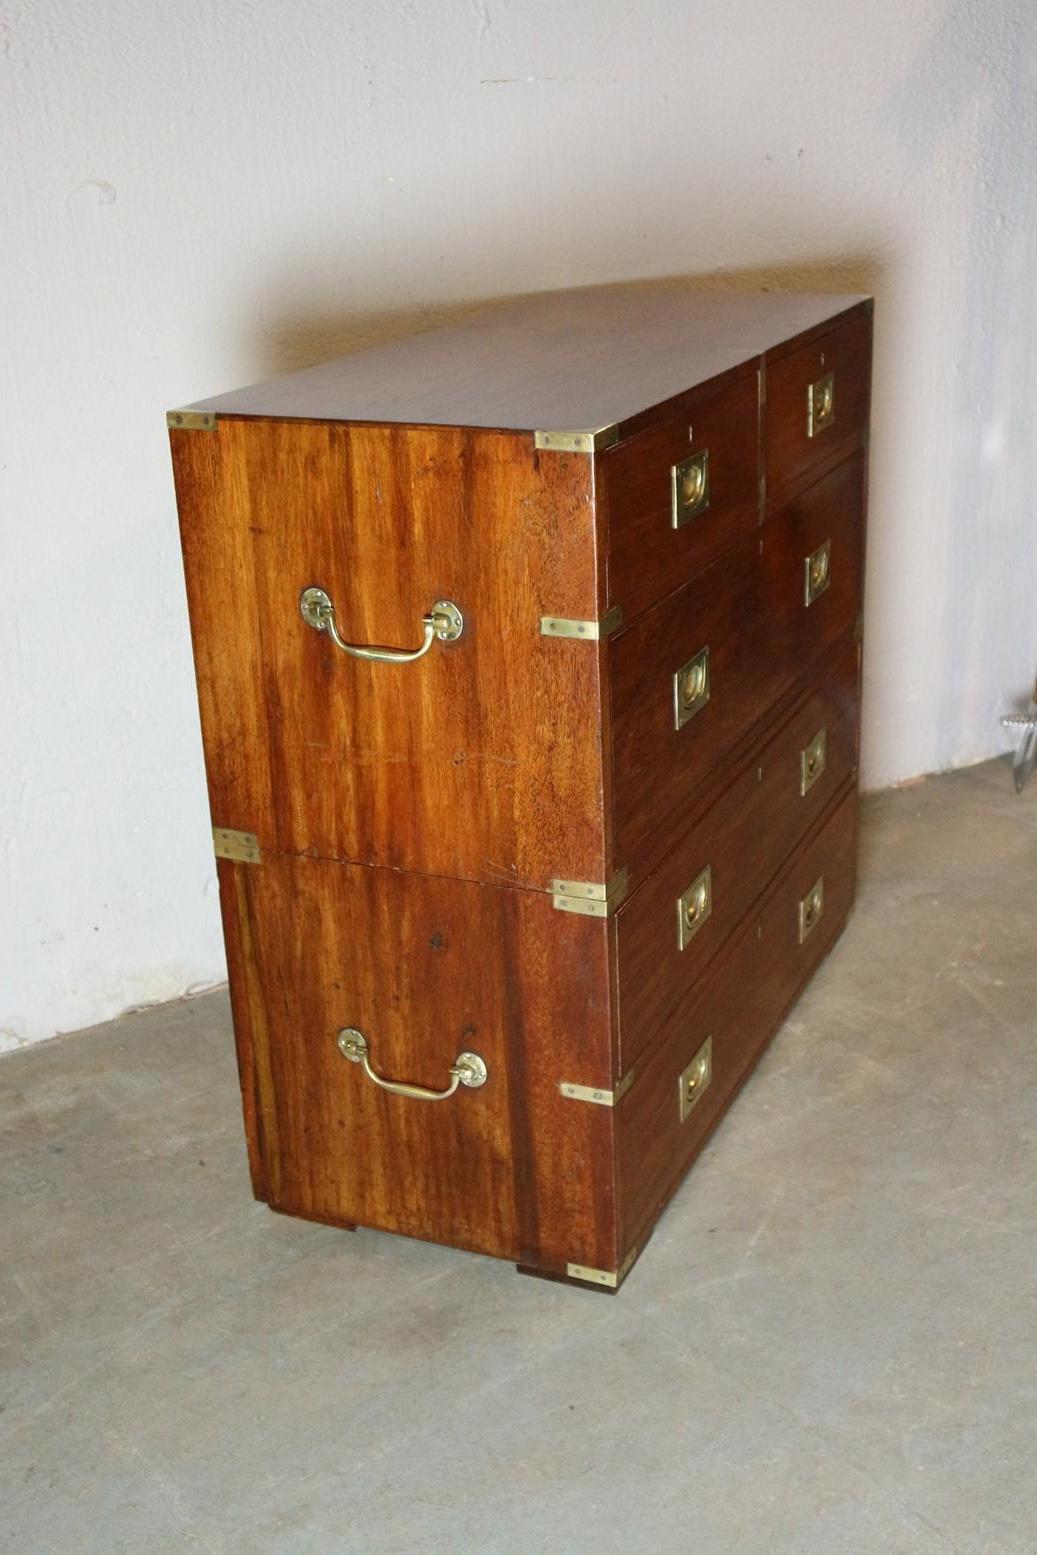 Antique teak Campaign chest of drawers in very good condition. In this cabinet, the brass corners and drawer pulls are polished to make it stand out. The cabinet consists of 2 parts as usual with Campaign drawer cabinets,

Origin: